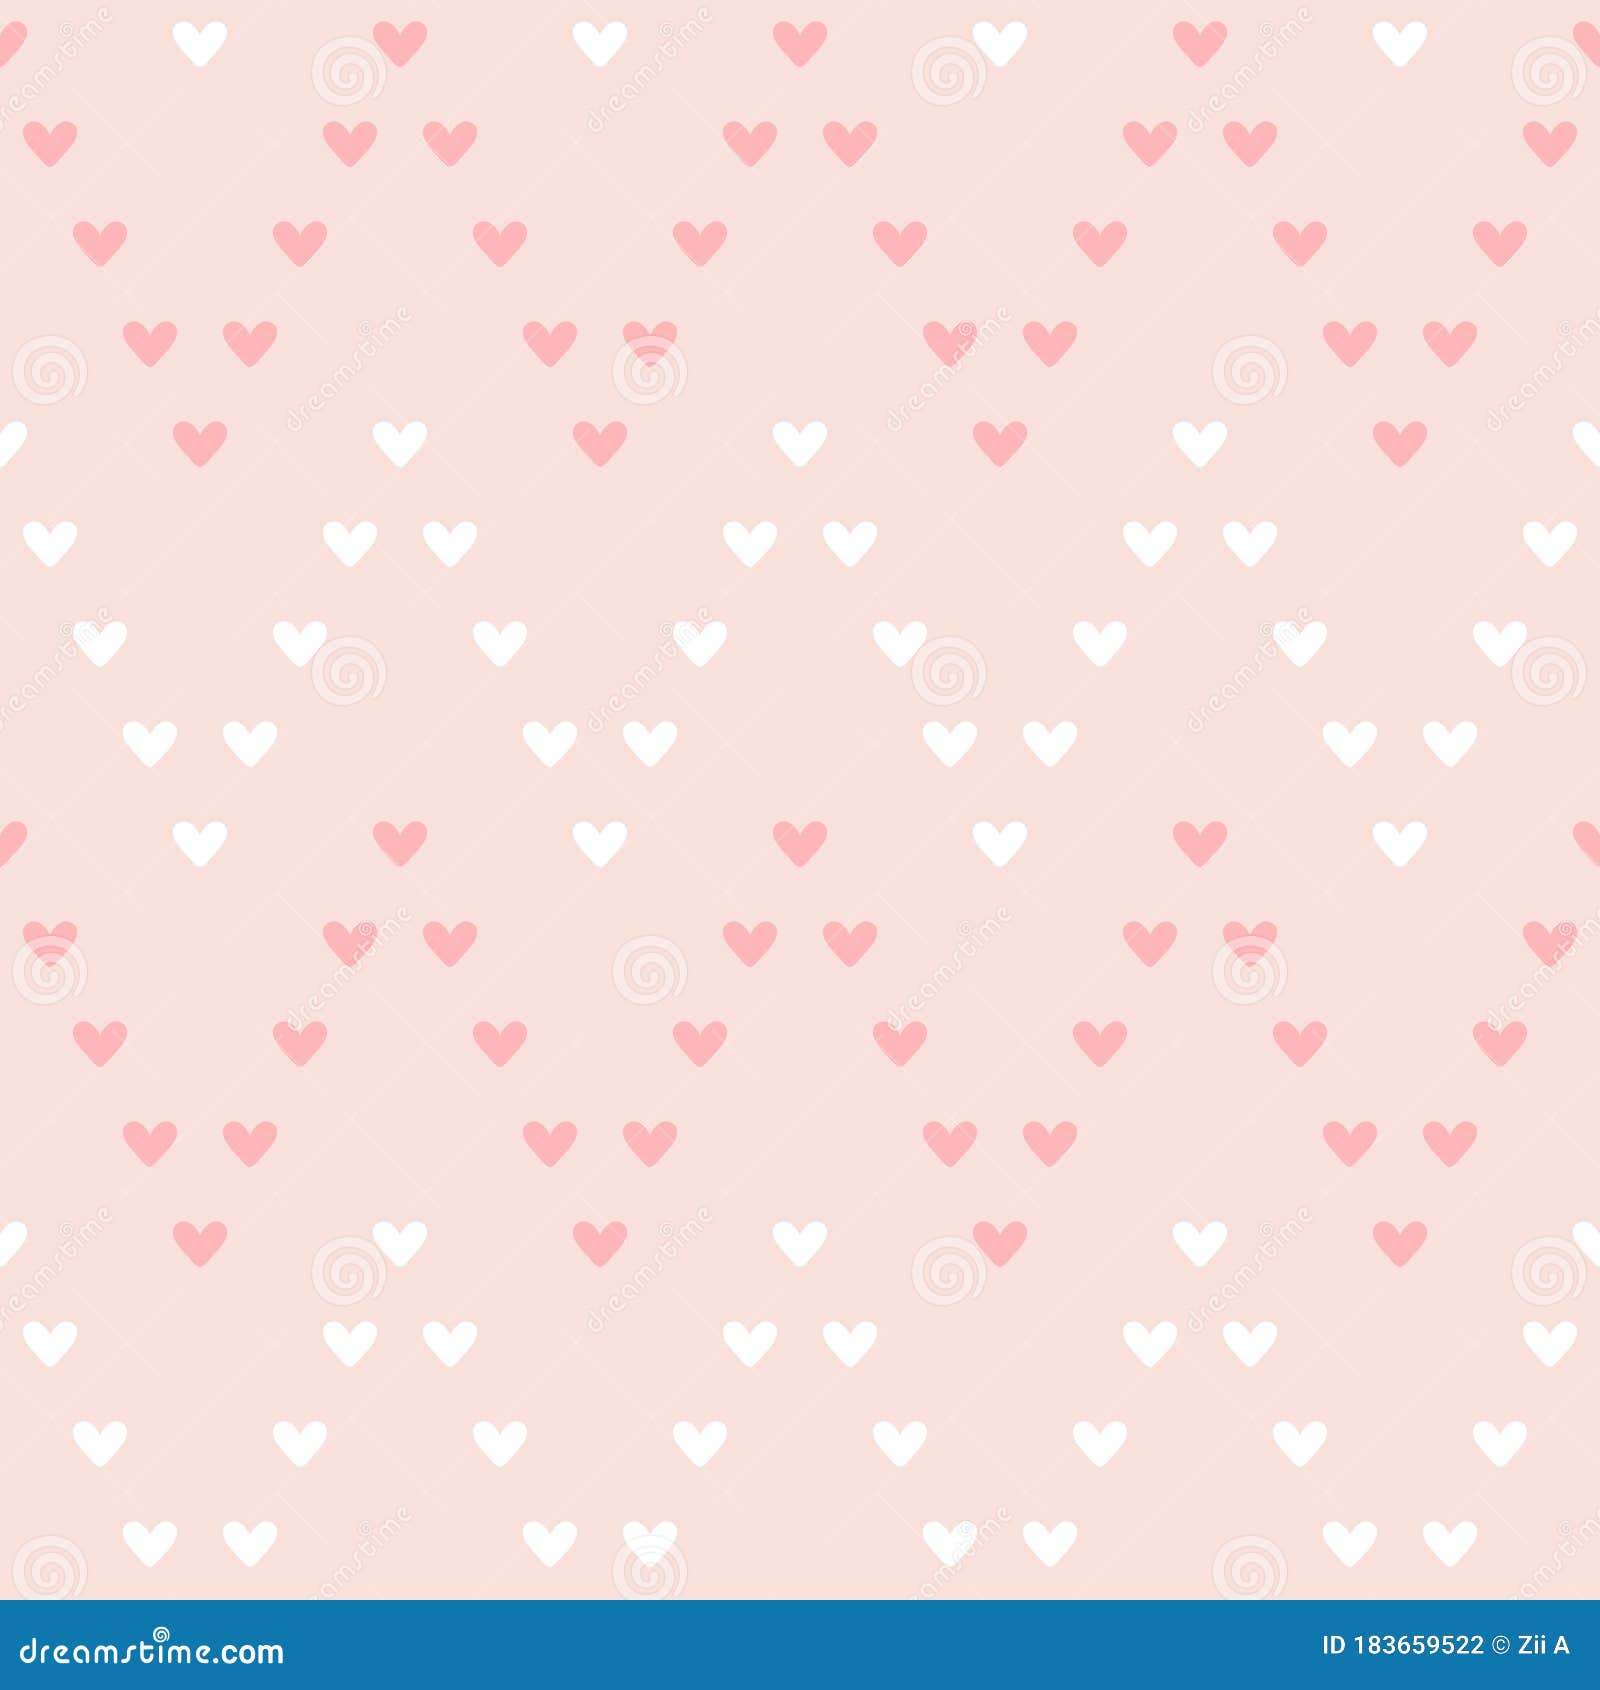 Simple Love Heart Zigzag Pink Monochrome Seamless Pattern Background  Wallpaper Stock Vector - Illustration of banner, happy: 183659522